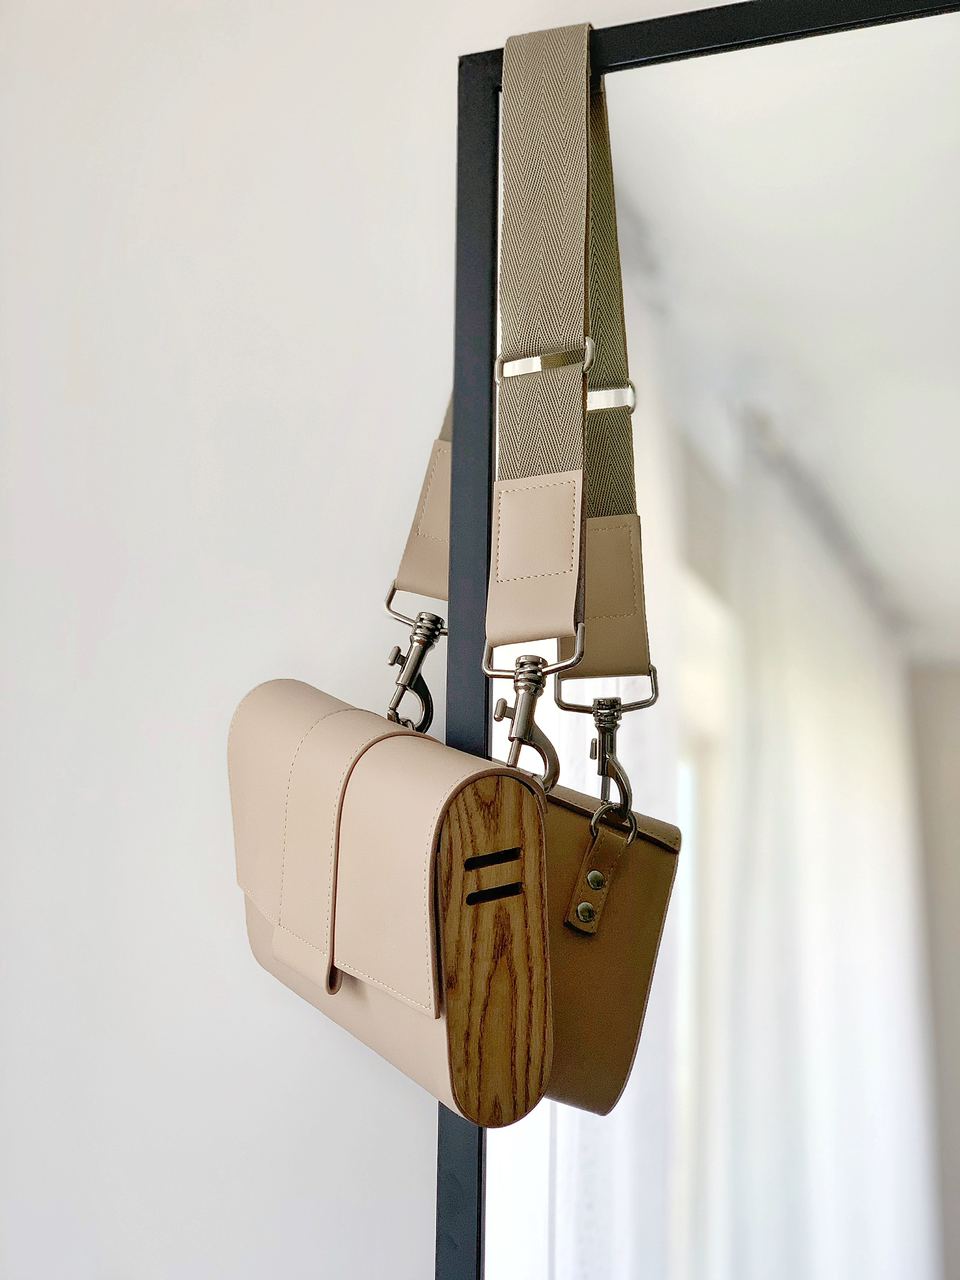 Kate Chi Wooden Walls Bag hung on a mirror.